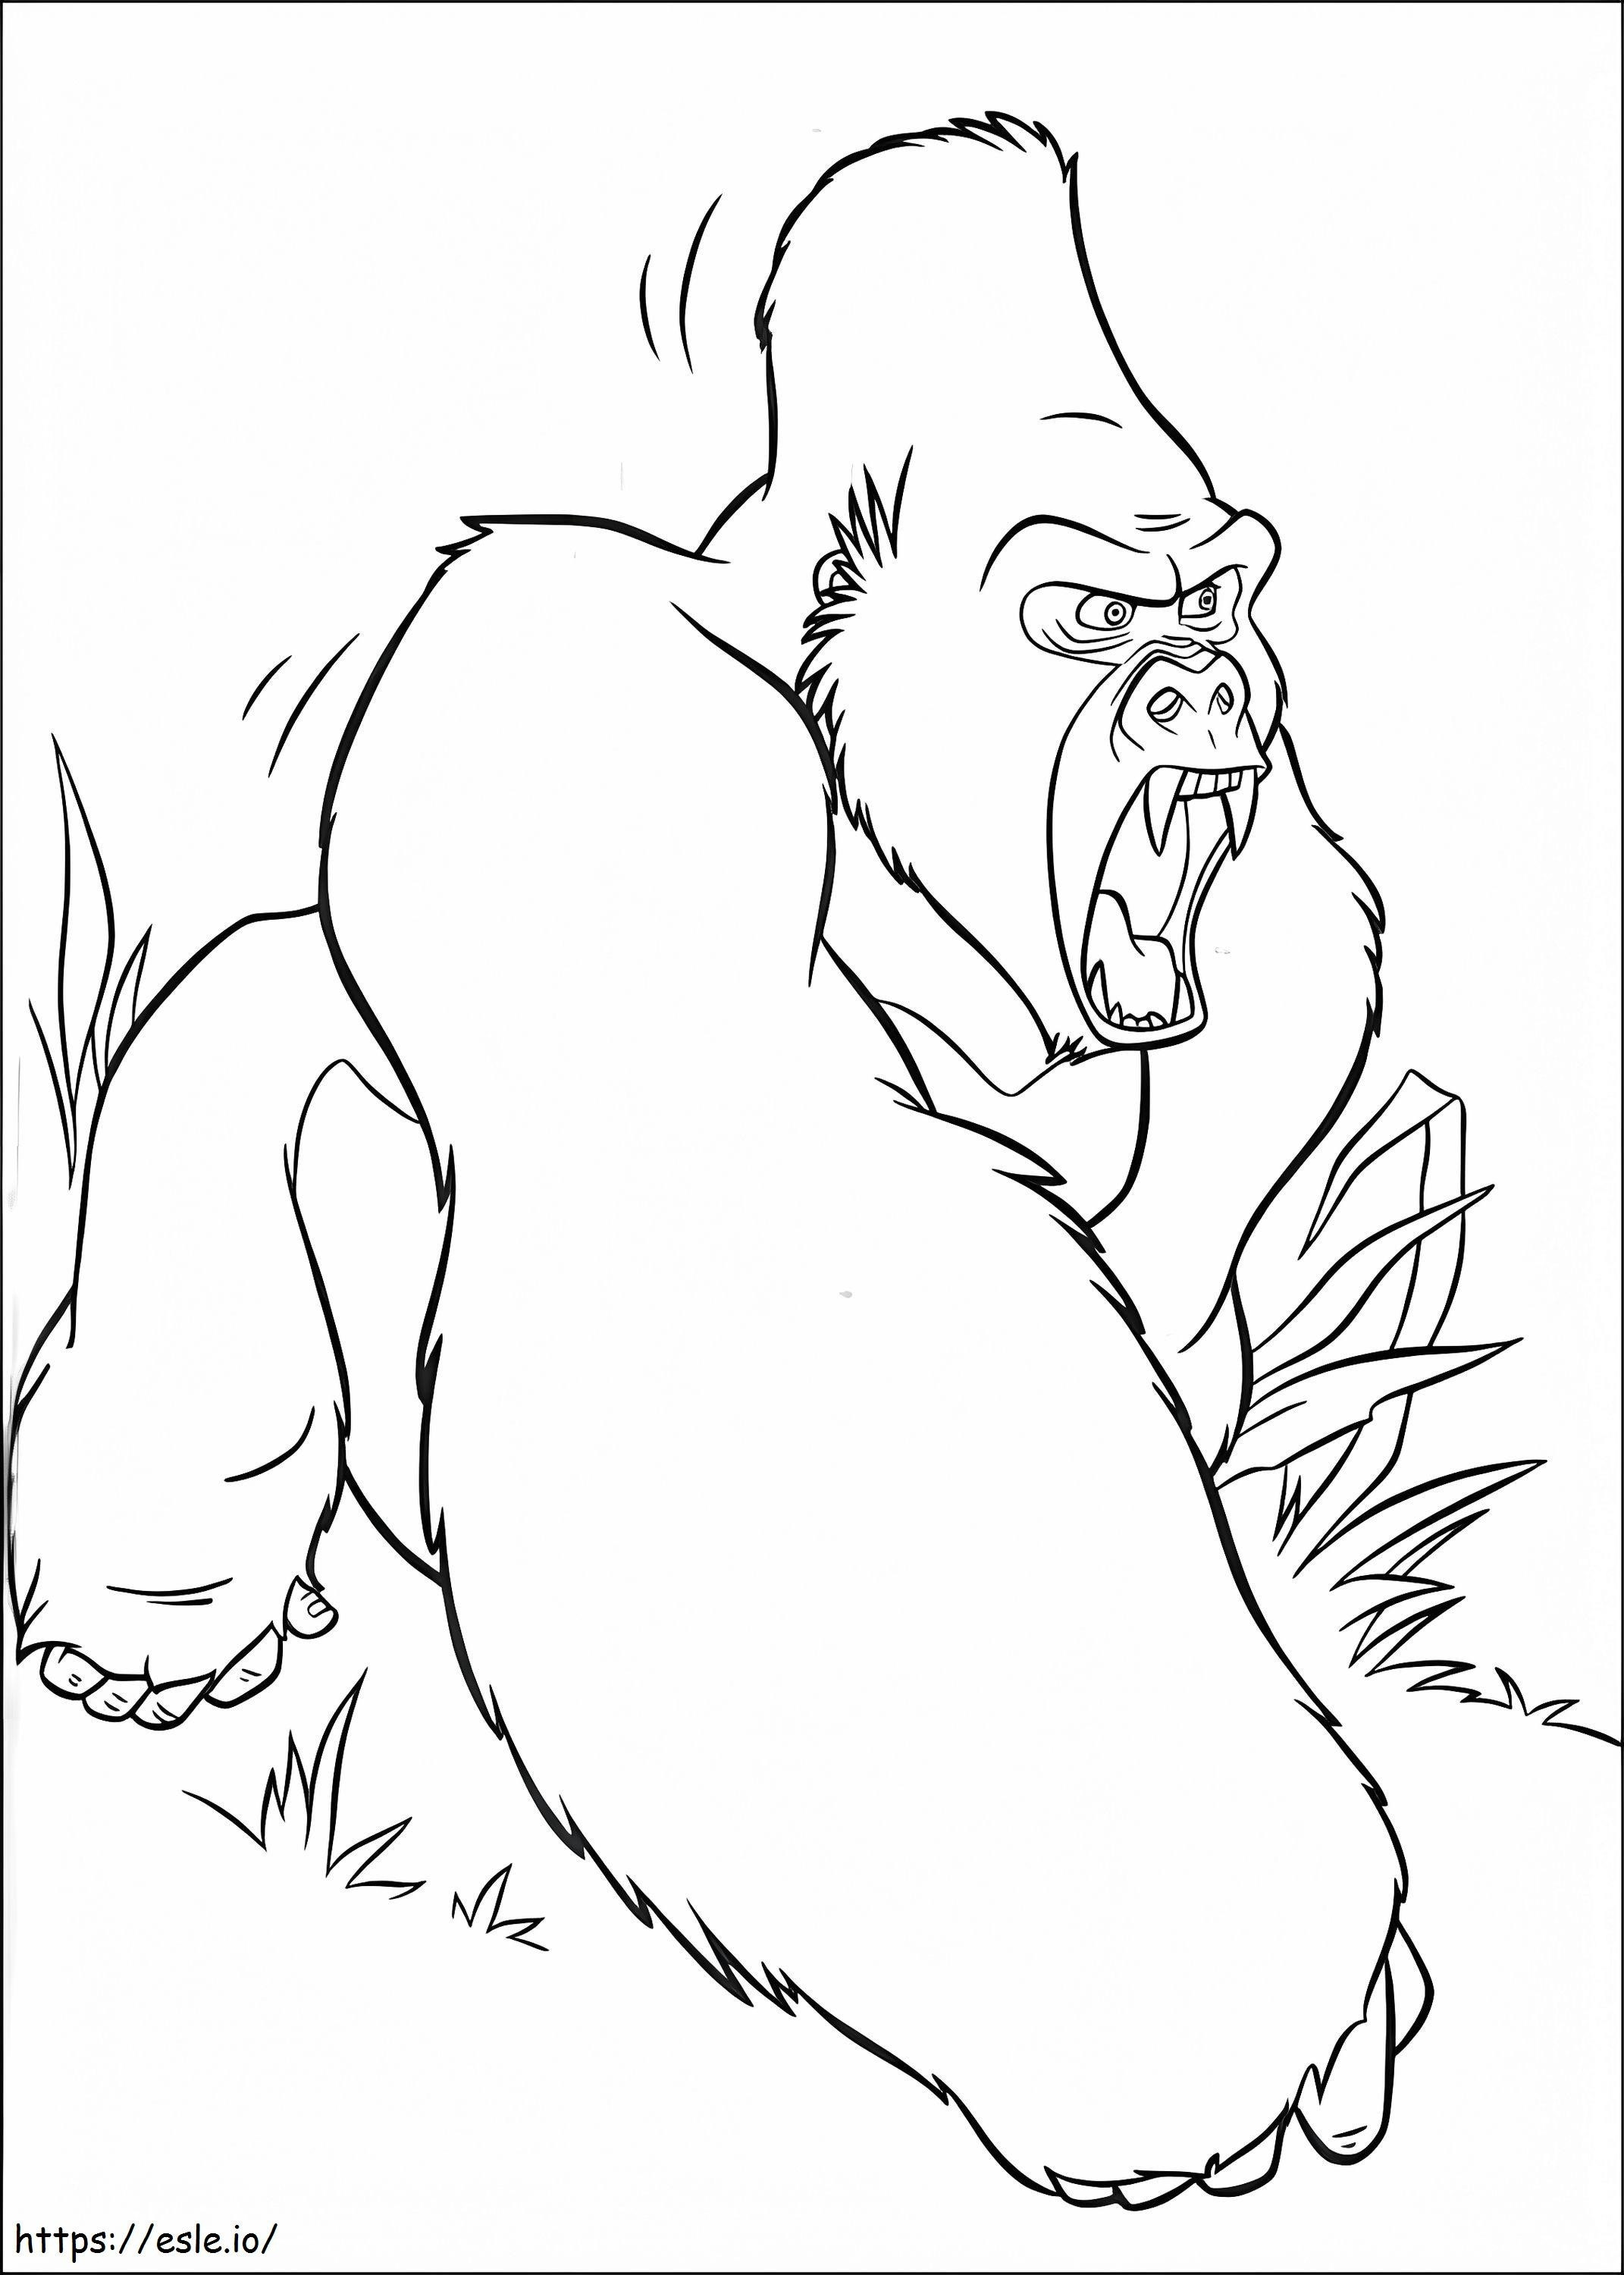 Angry Kerchak coloring page